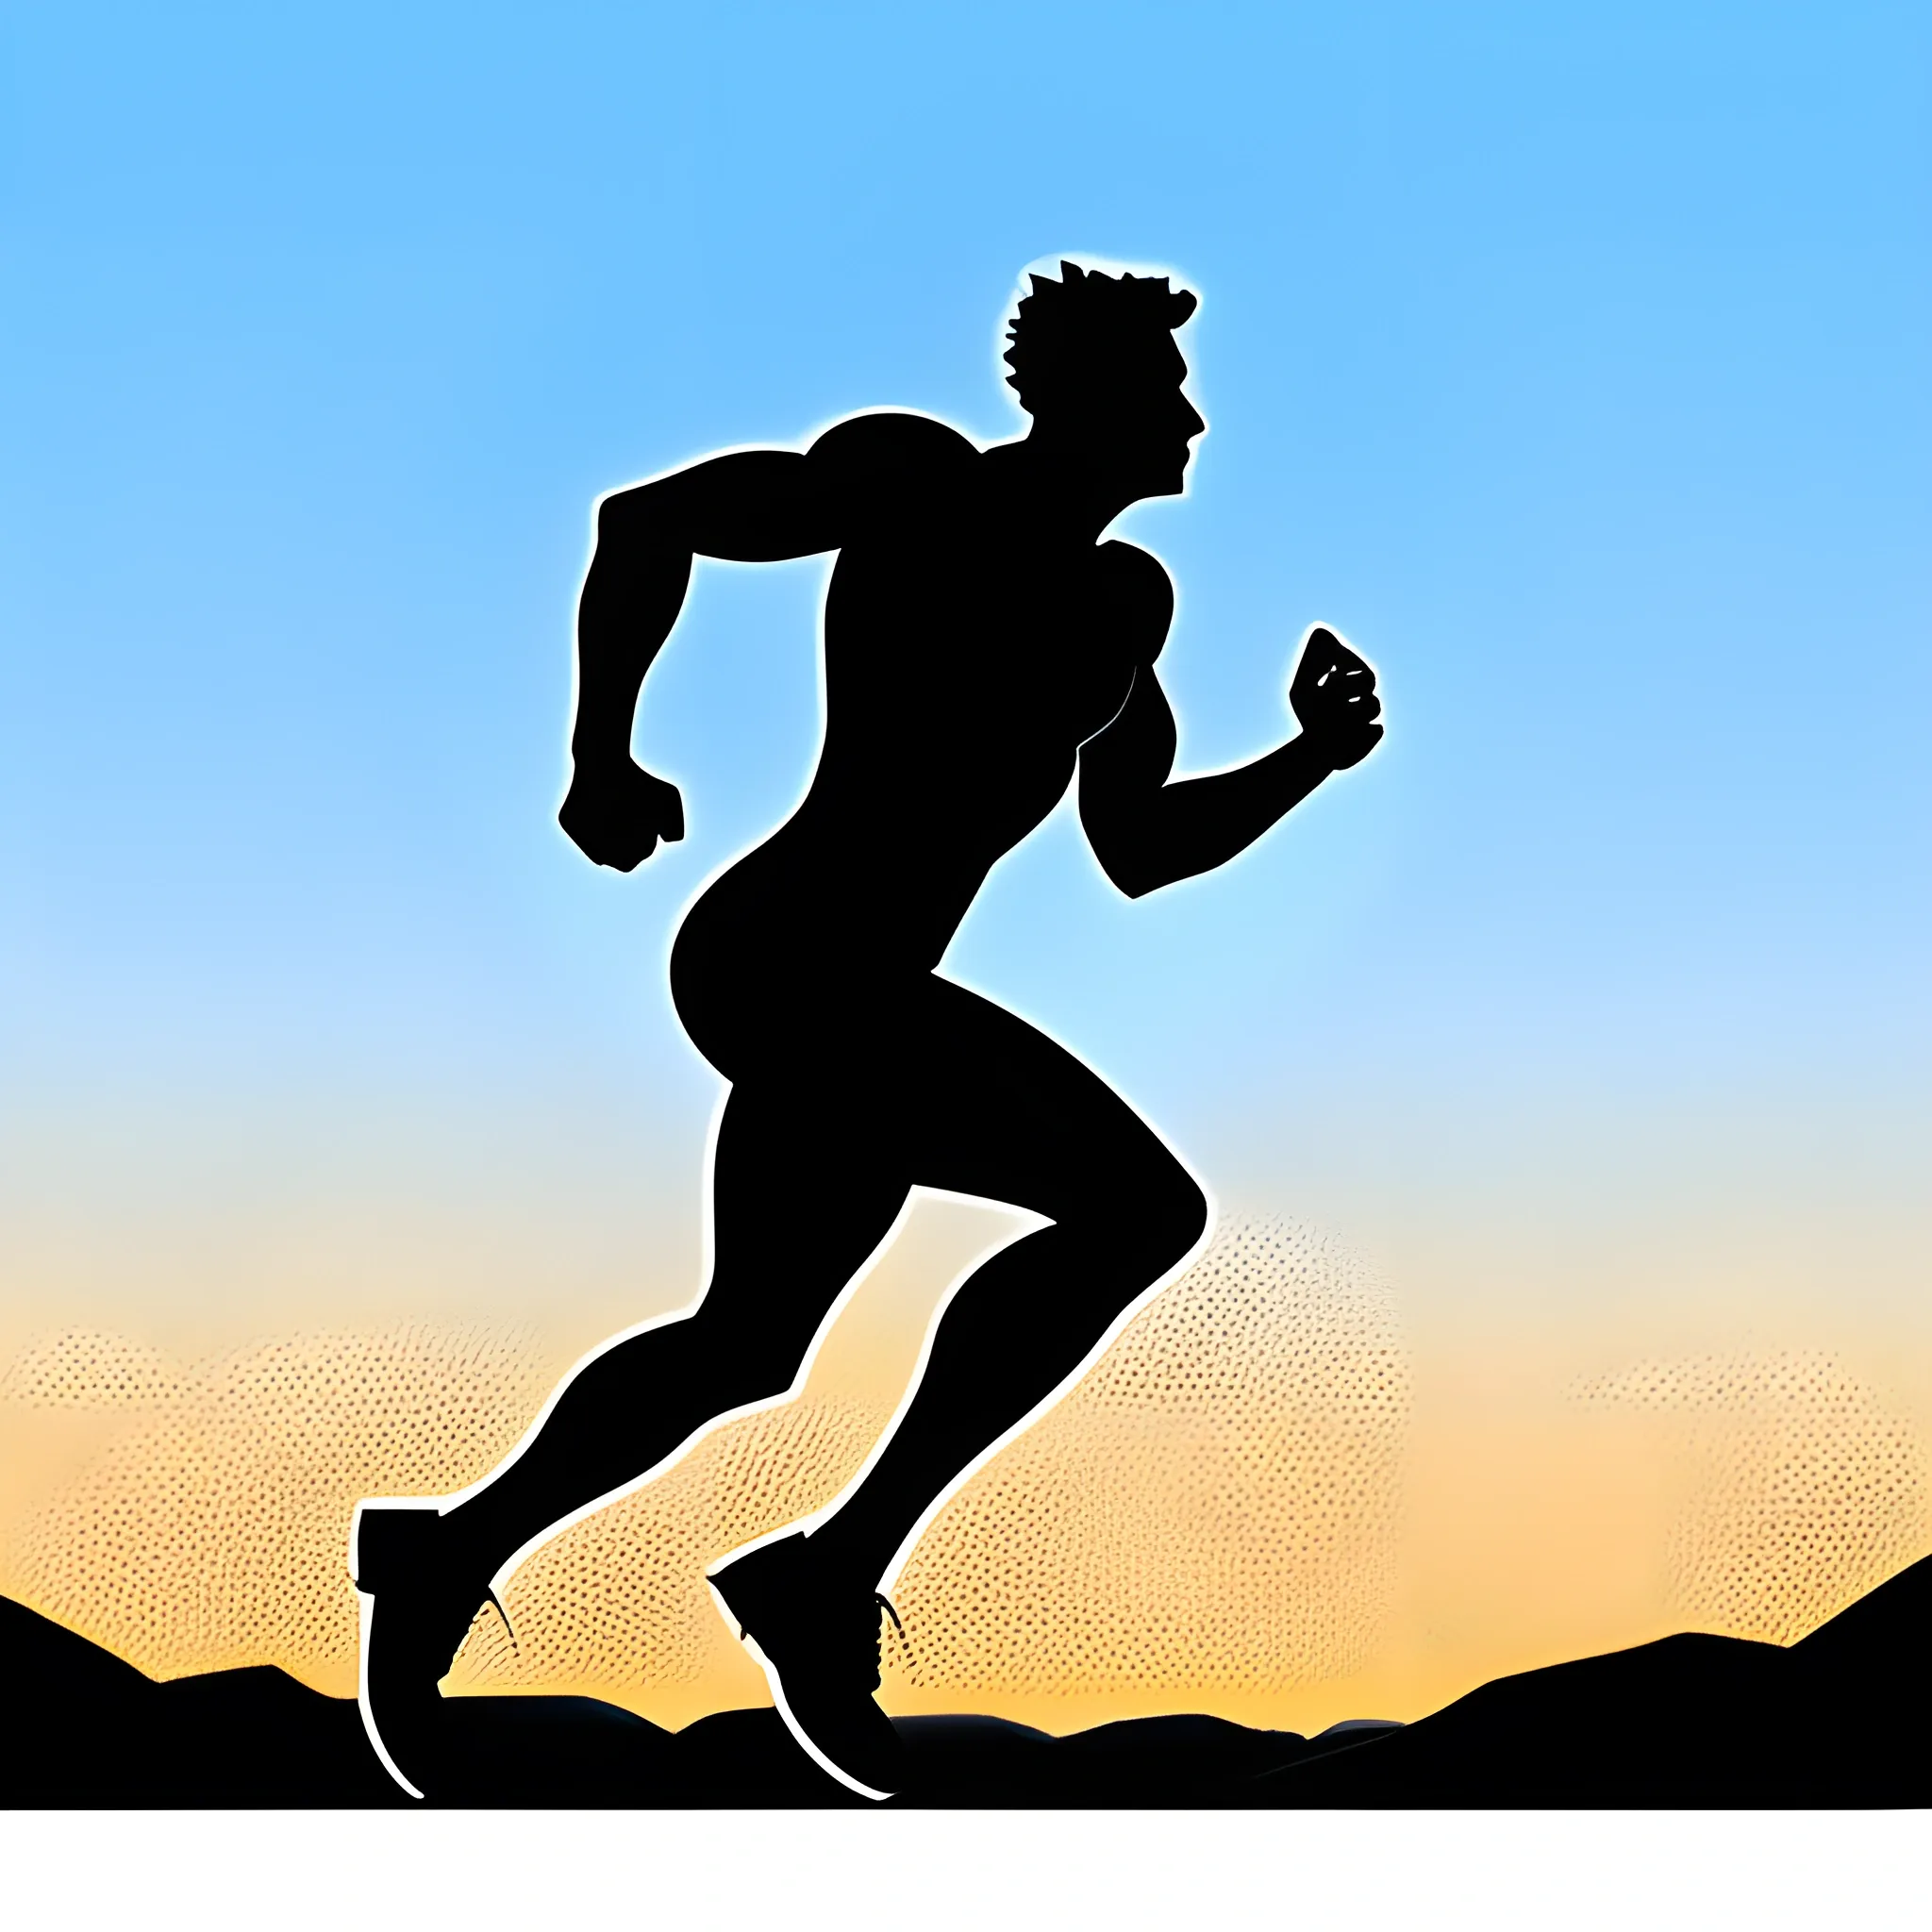 Draw the silhouette of a young person running.